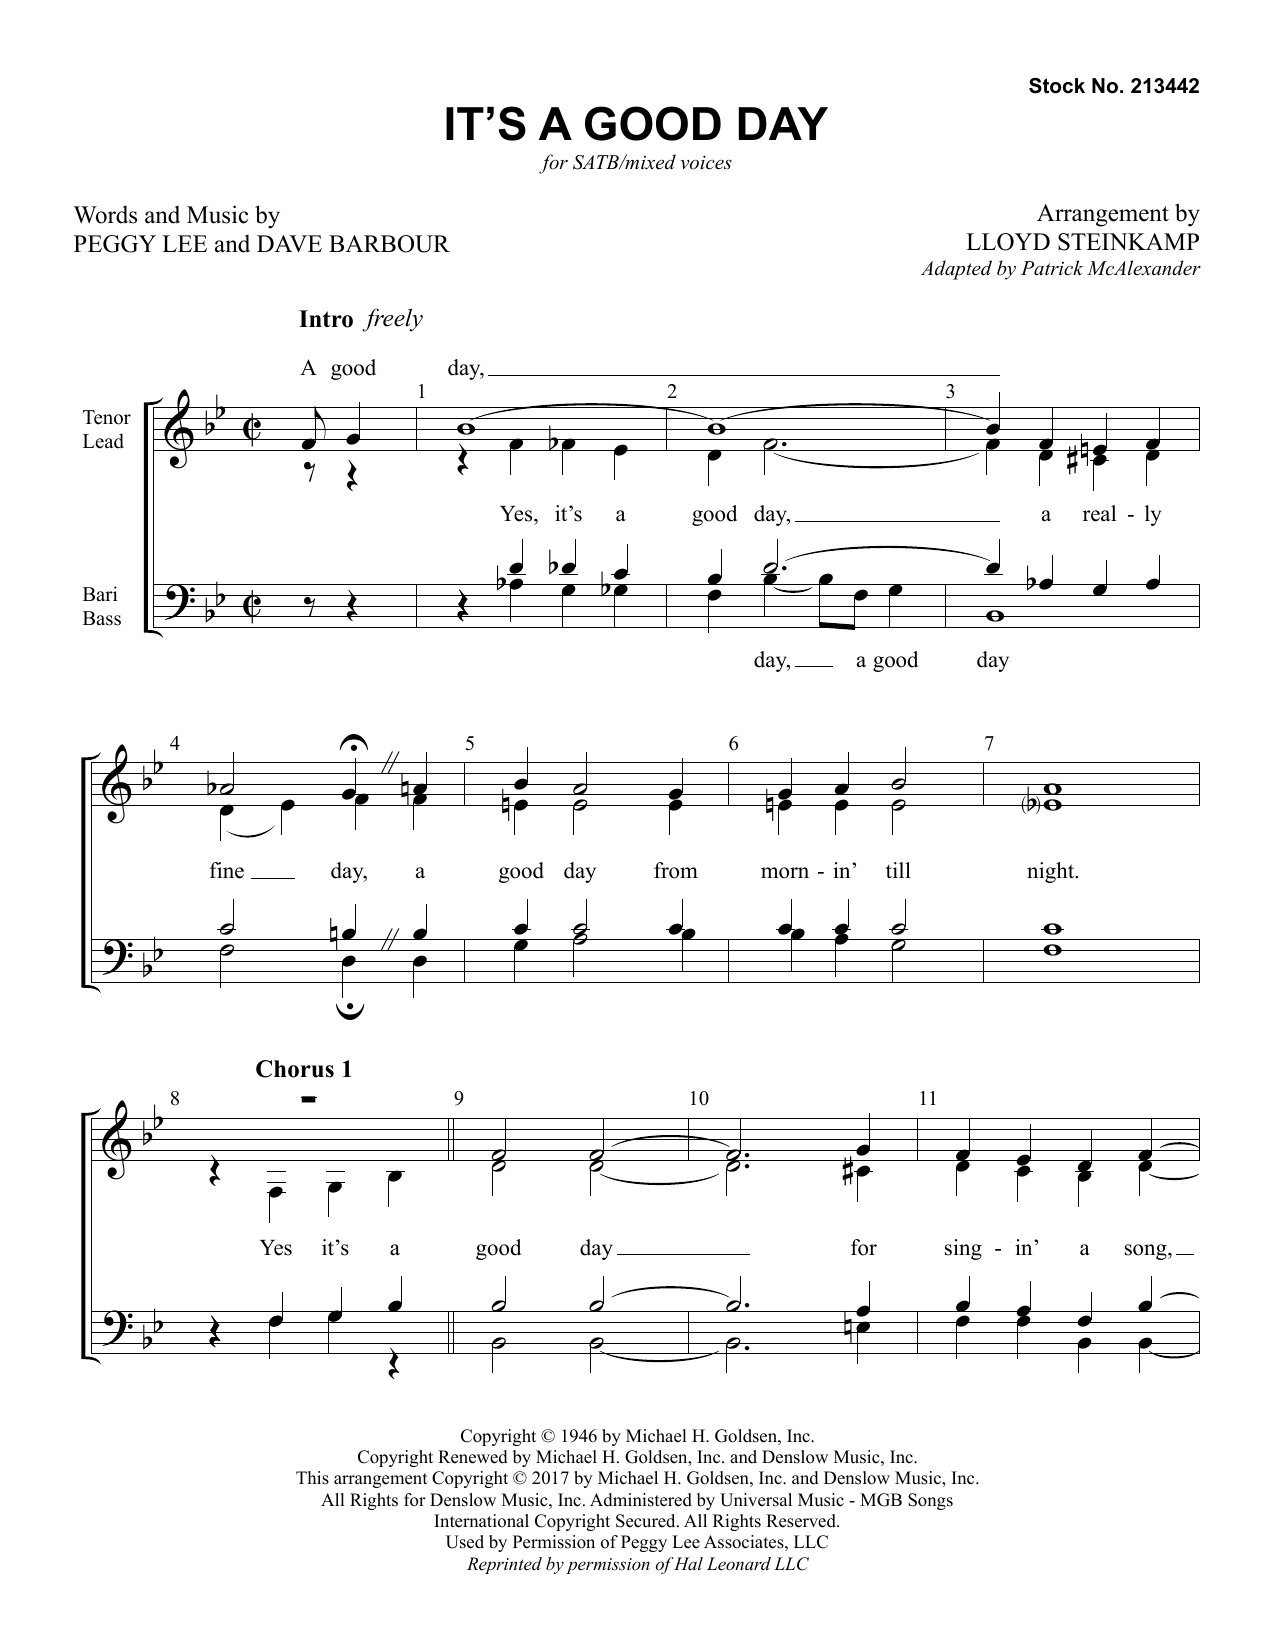 Download Peggy Lee It's A Good Day (arr. Lloyd Steinkamp) Sheet Music